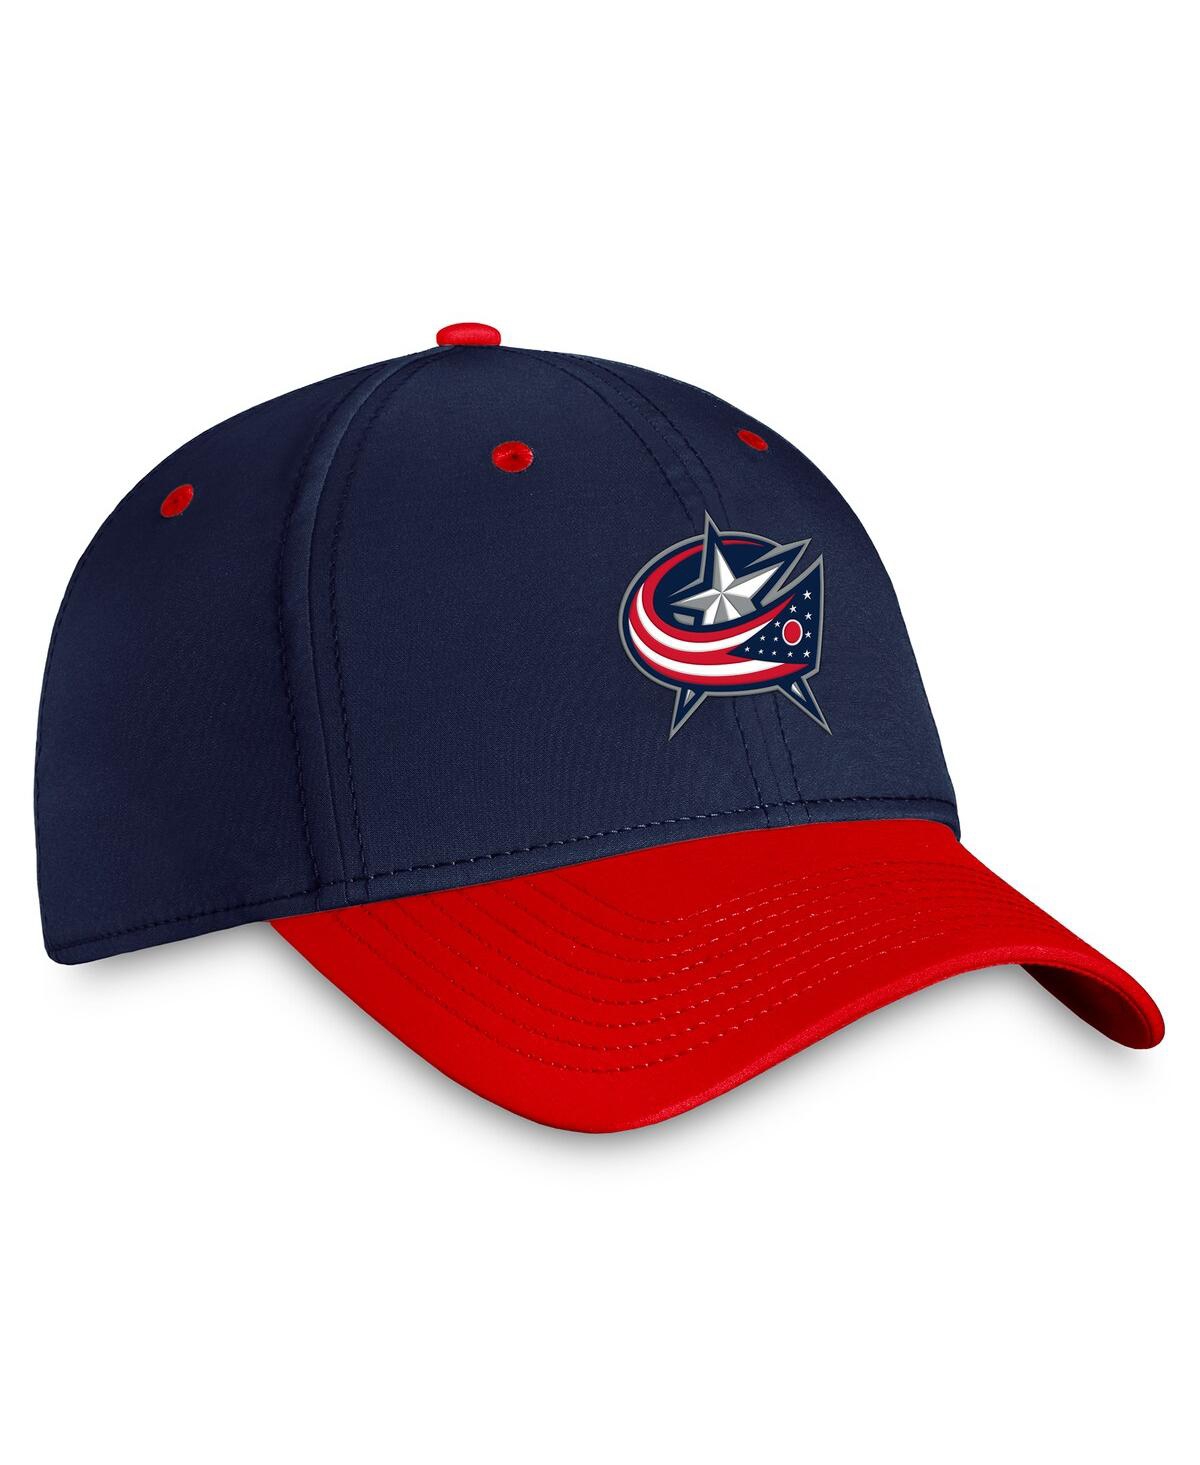 Shop Fanatics Men's  Navy, Red Columbus Blue Jackets Authentic Pro Rink Two-tone Flex Hat In Navy,red